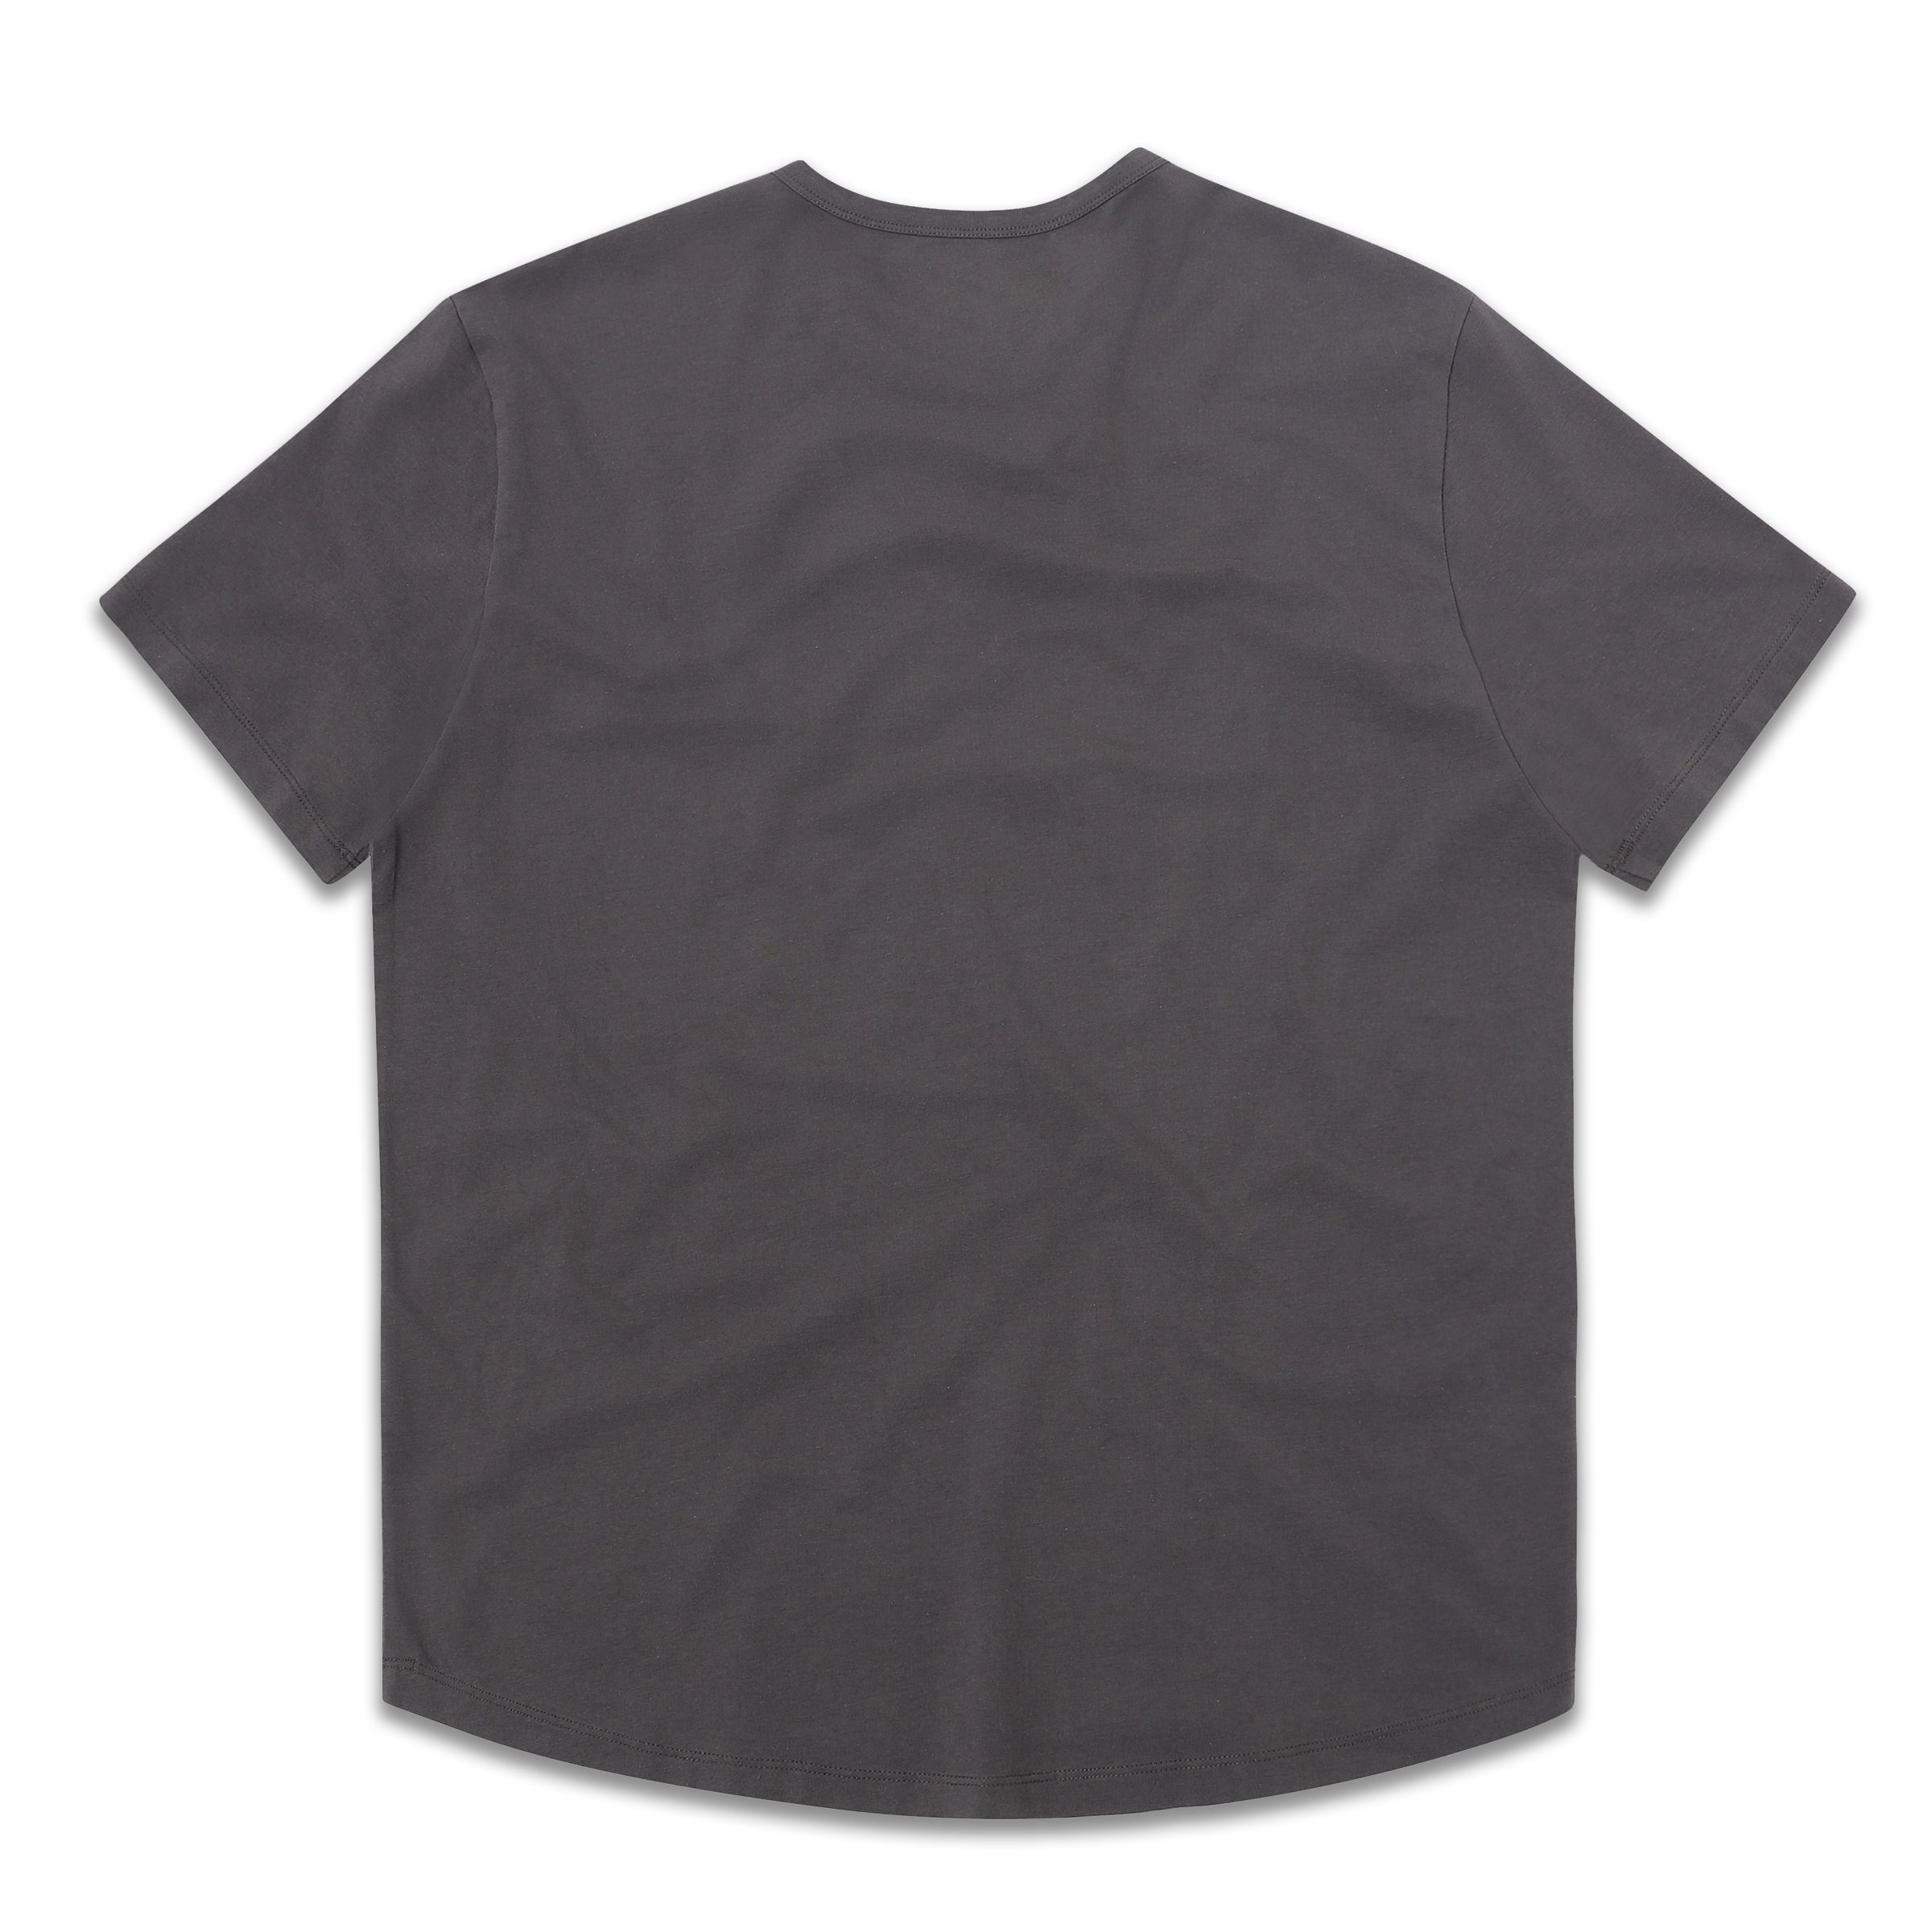 Supima Curved Tee Coal back with crewneck, curved bottom hem, and short sleeves